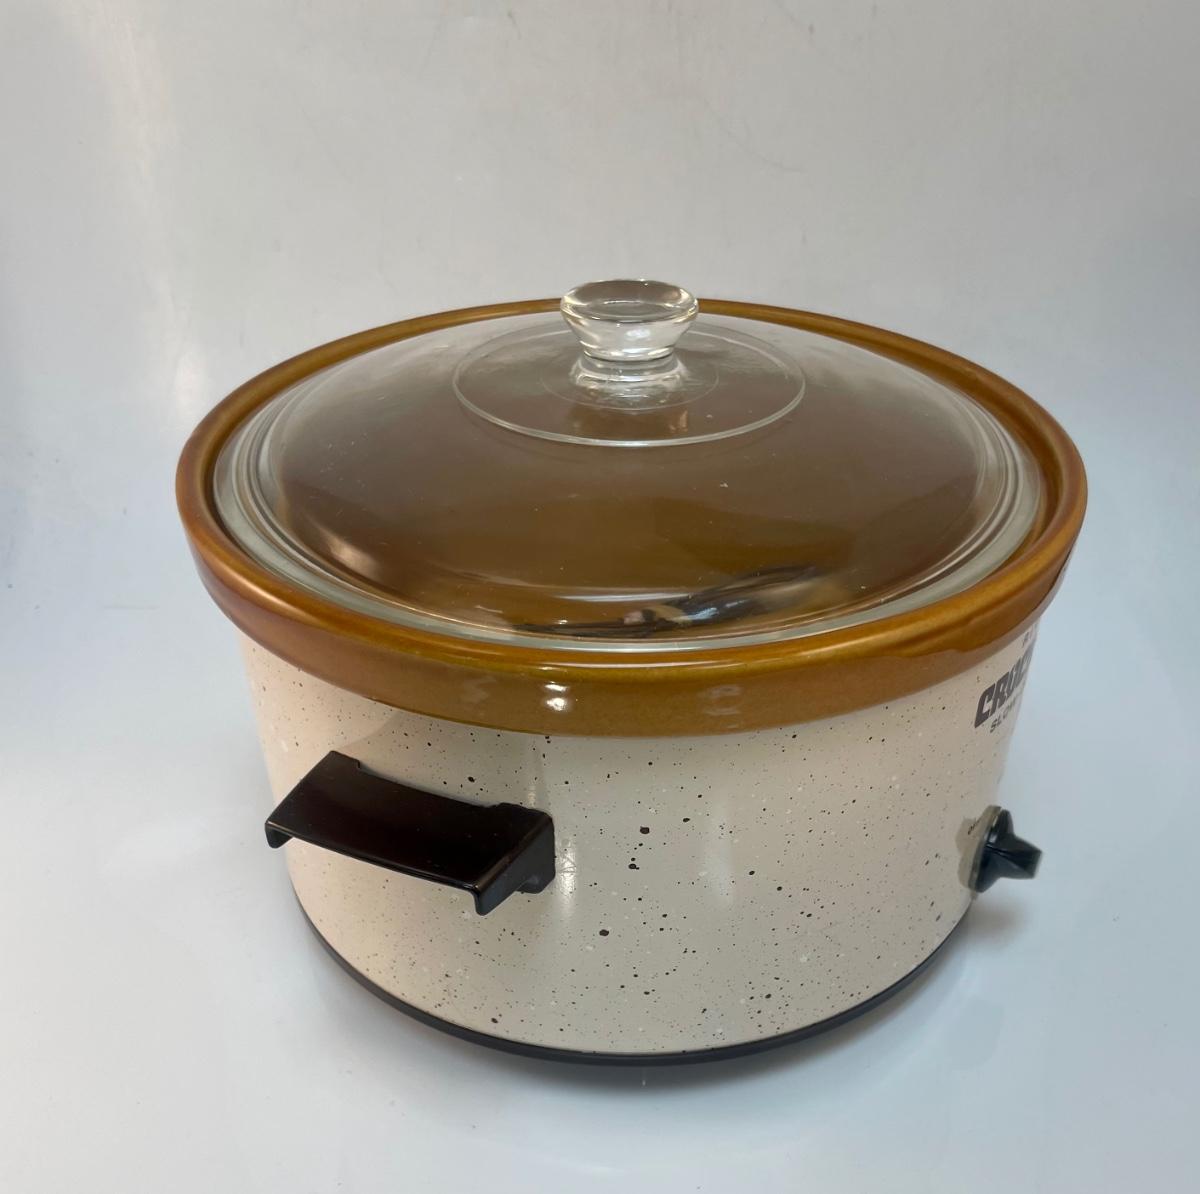 Sold at Auction: Rival Stoneware Crock Pot Slow Cooker Oval